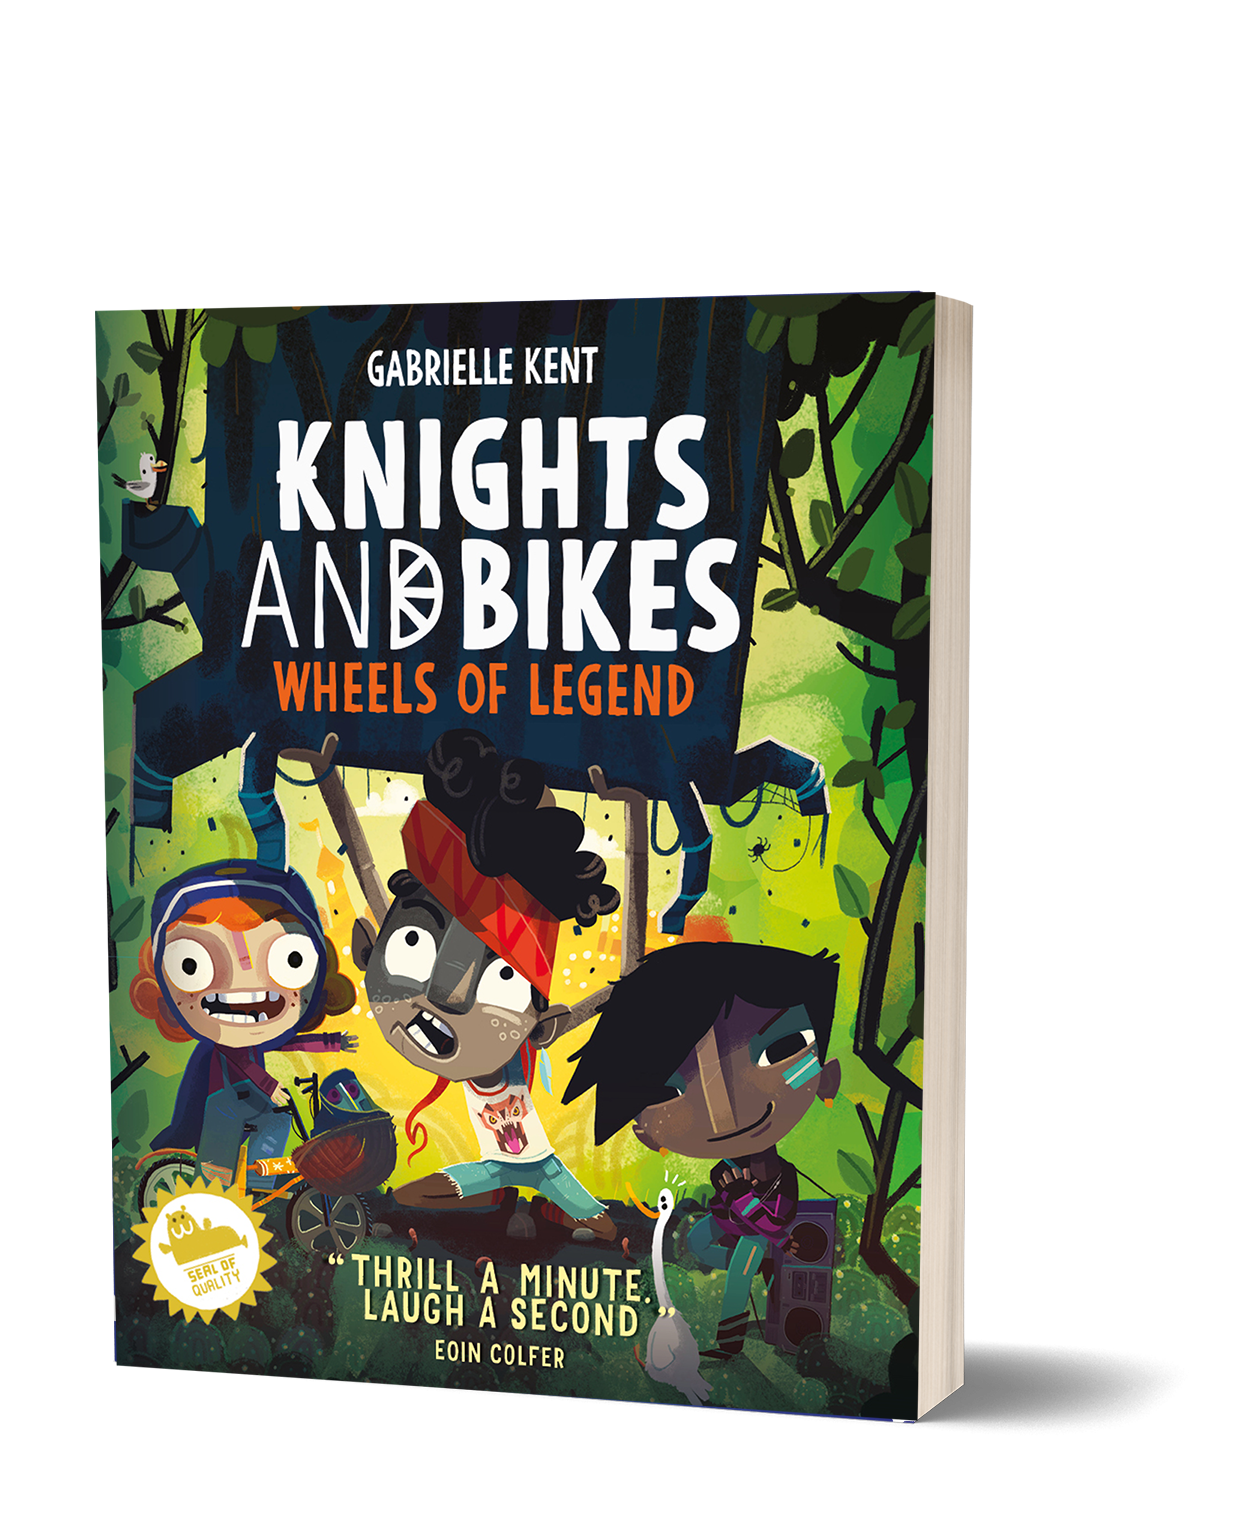 Knights And Bikes: Wheels of Legend